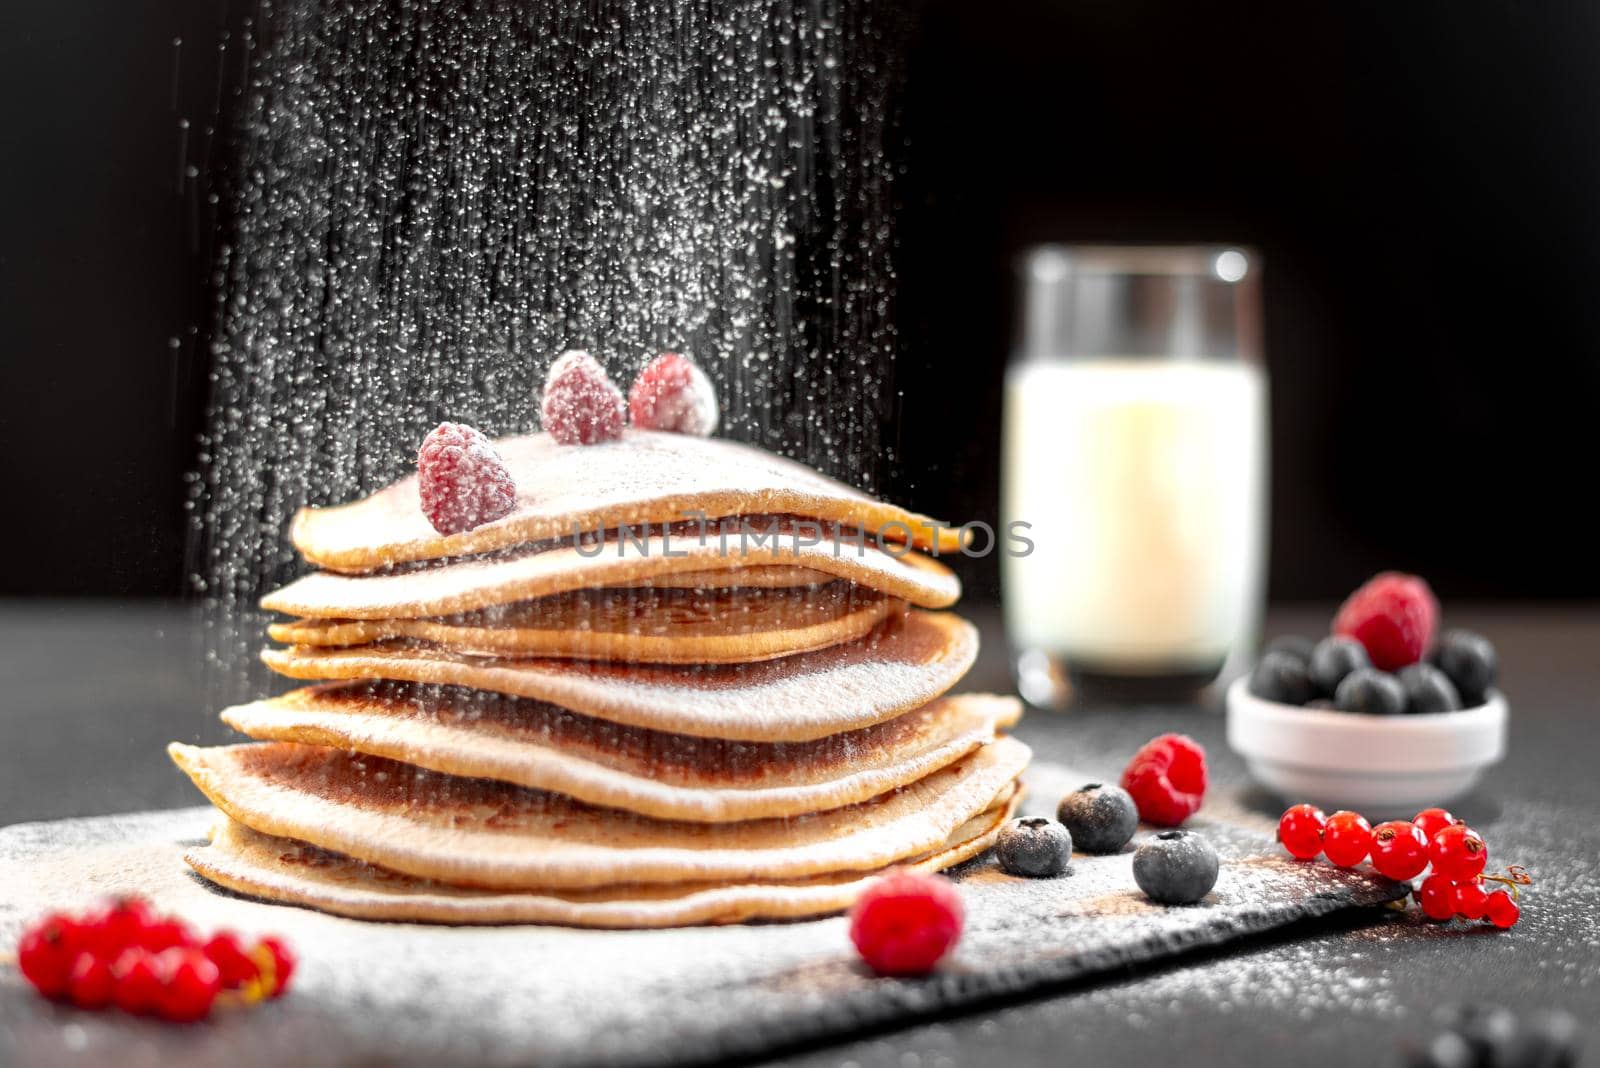 Large American pancakes on a dark background. Breakfast European. Chef sprinkles pancakes with powdered sugar on black background. Food for breakfast healthy eating. Pancakes without butter with berries. Food for vegetarians and for dieting. American Pancakes Mini. Mini pancakes with blueberries and raspberries. American breakfast on a dark background. Healthy eating for the whole family. Homemade pancakes with berries